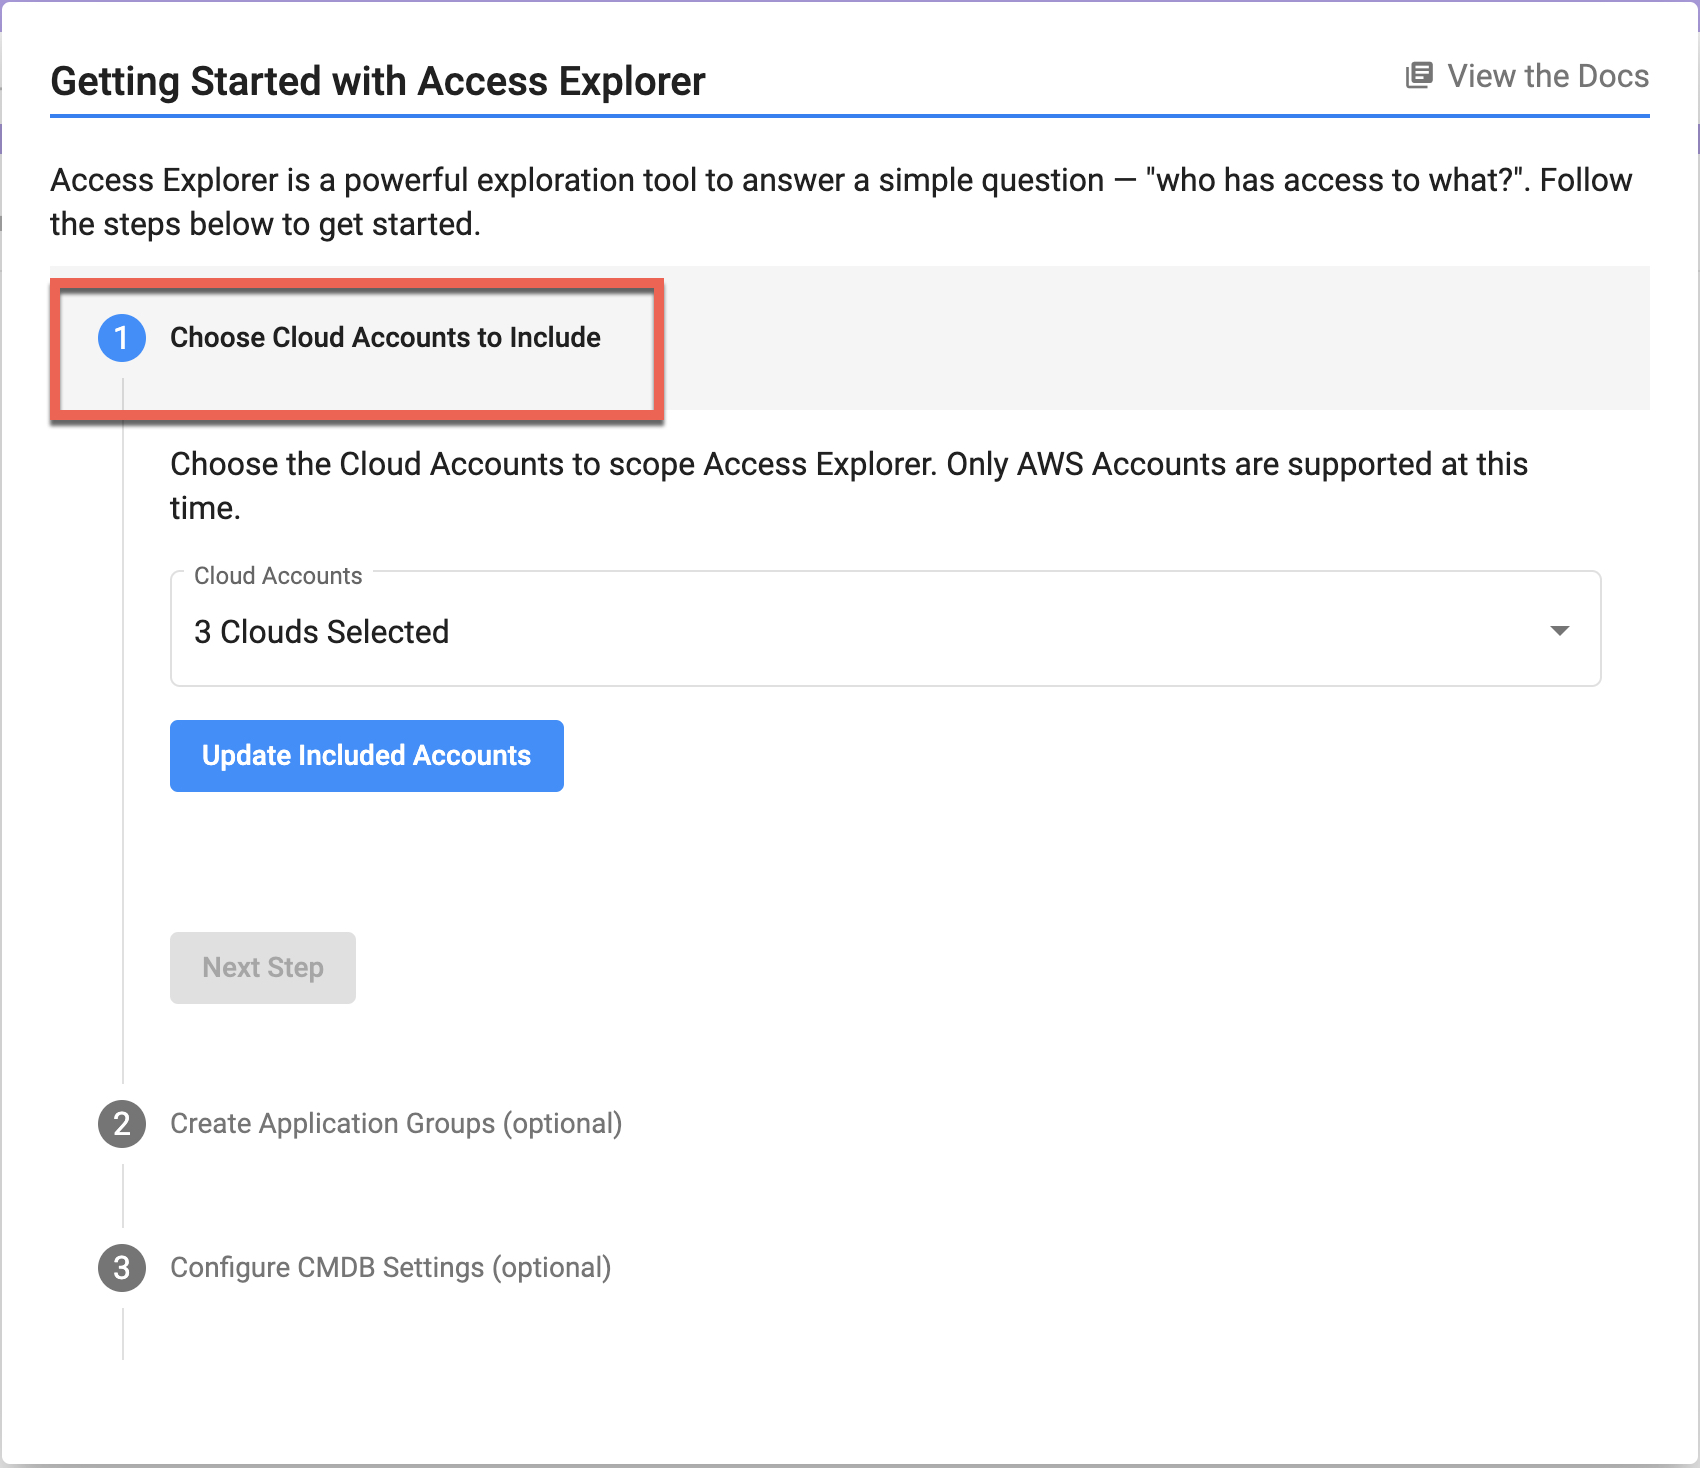 Getting Started with Access Explorer - Step 1 (Included Cloud Accounts)